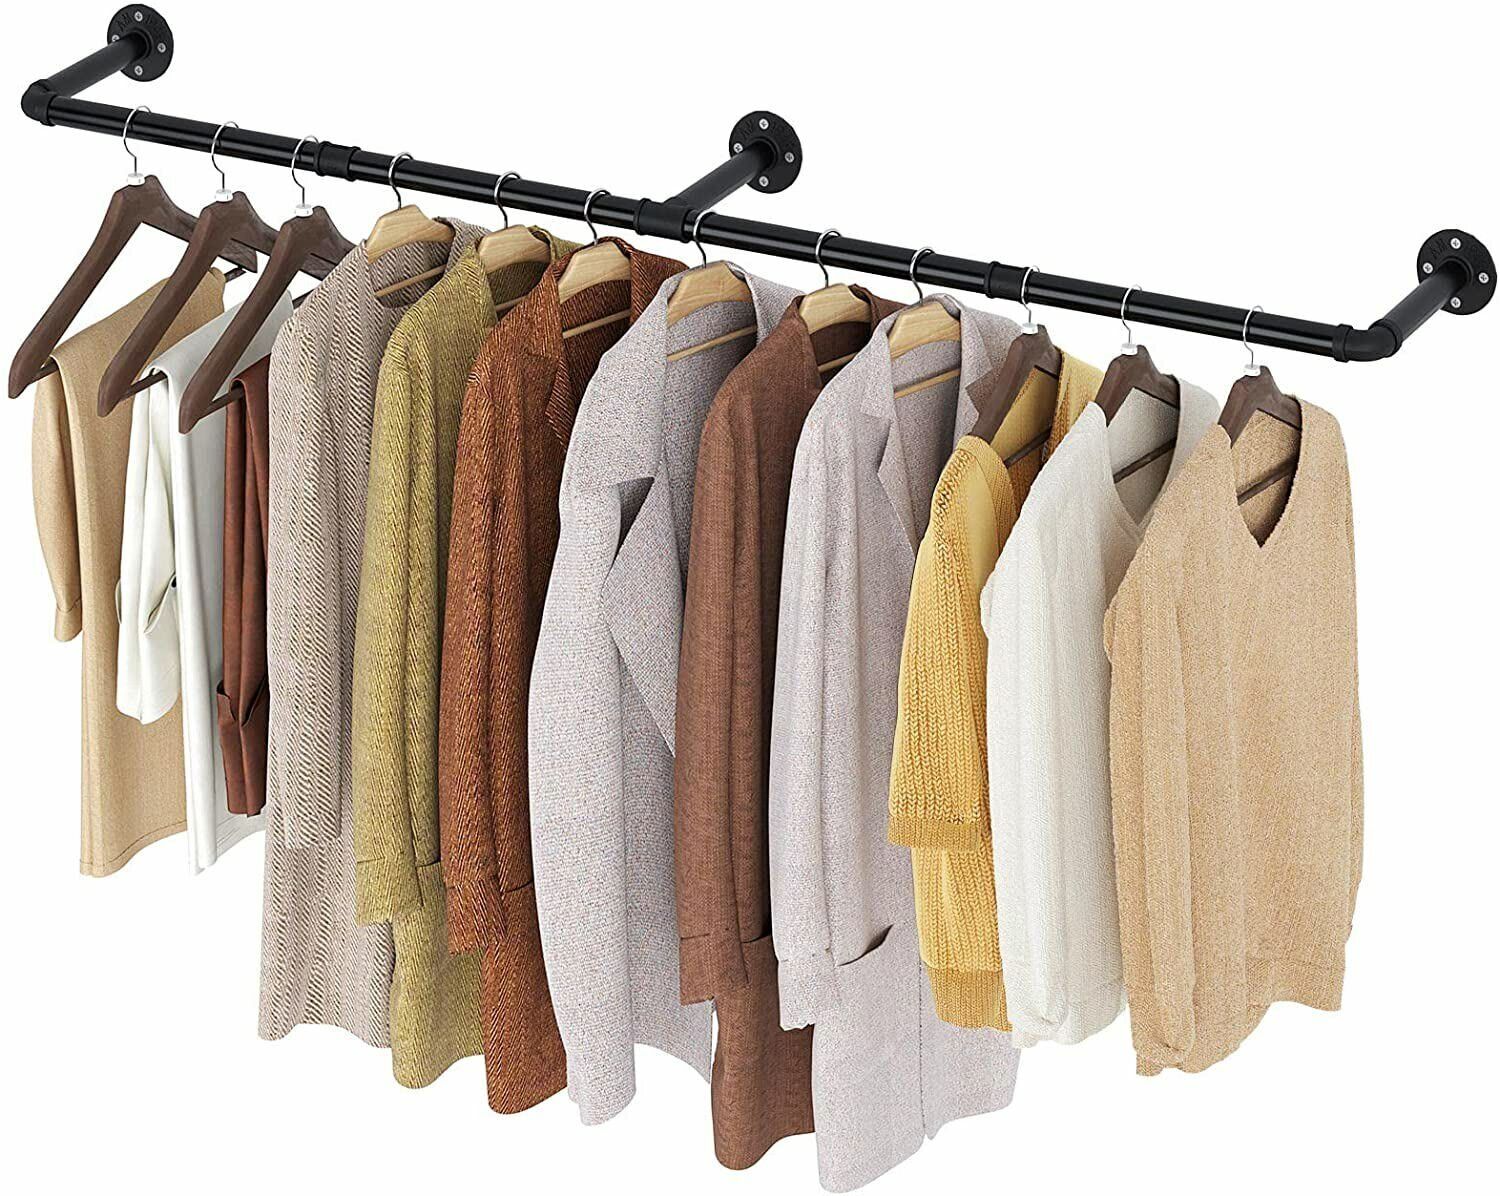 Heavy Duty Hanging Clothes Rack Wall Mounted Hanging Rod Detachable Load 66 lbs